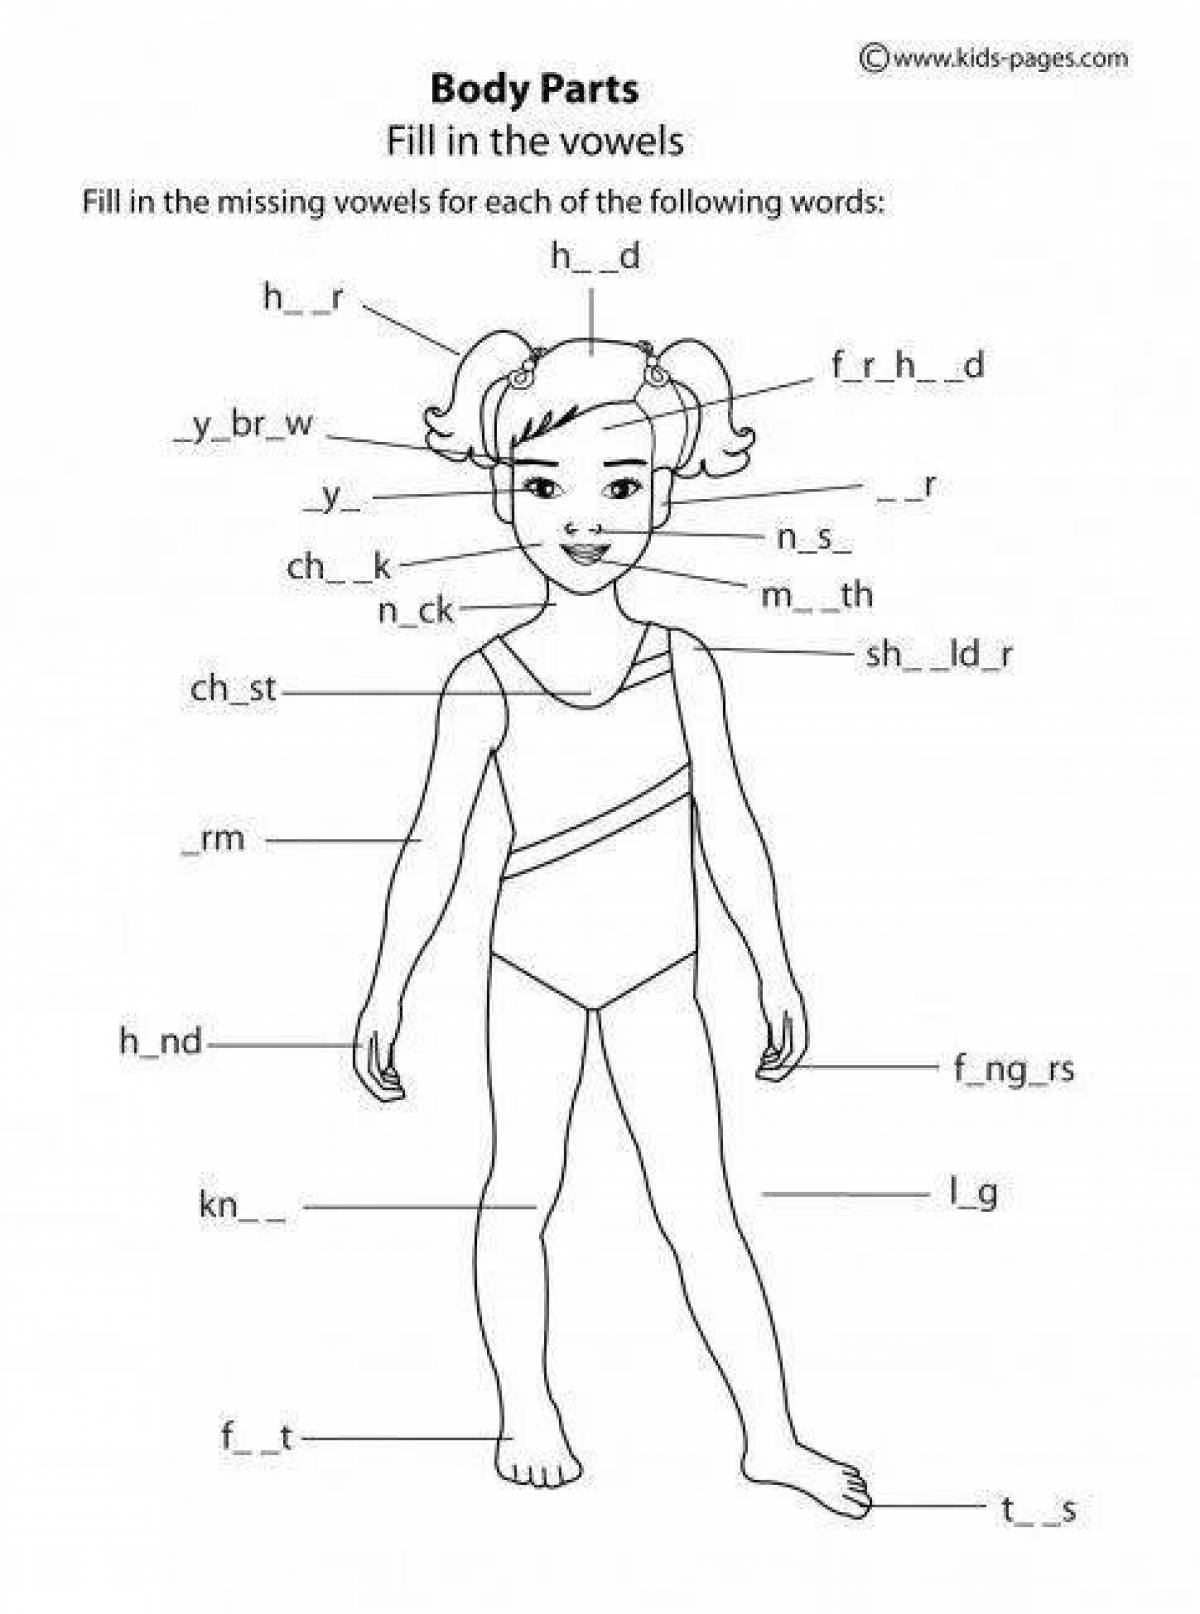 Coloring pages of attractive body parts